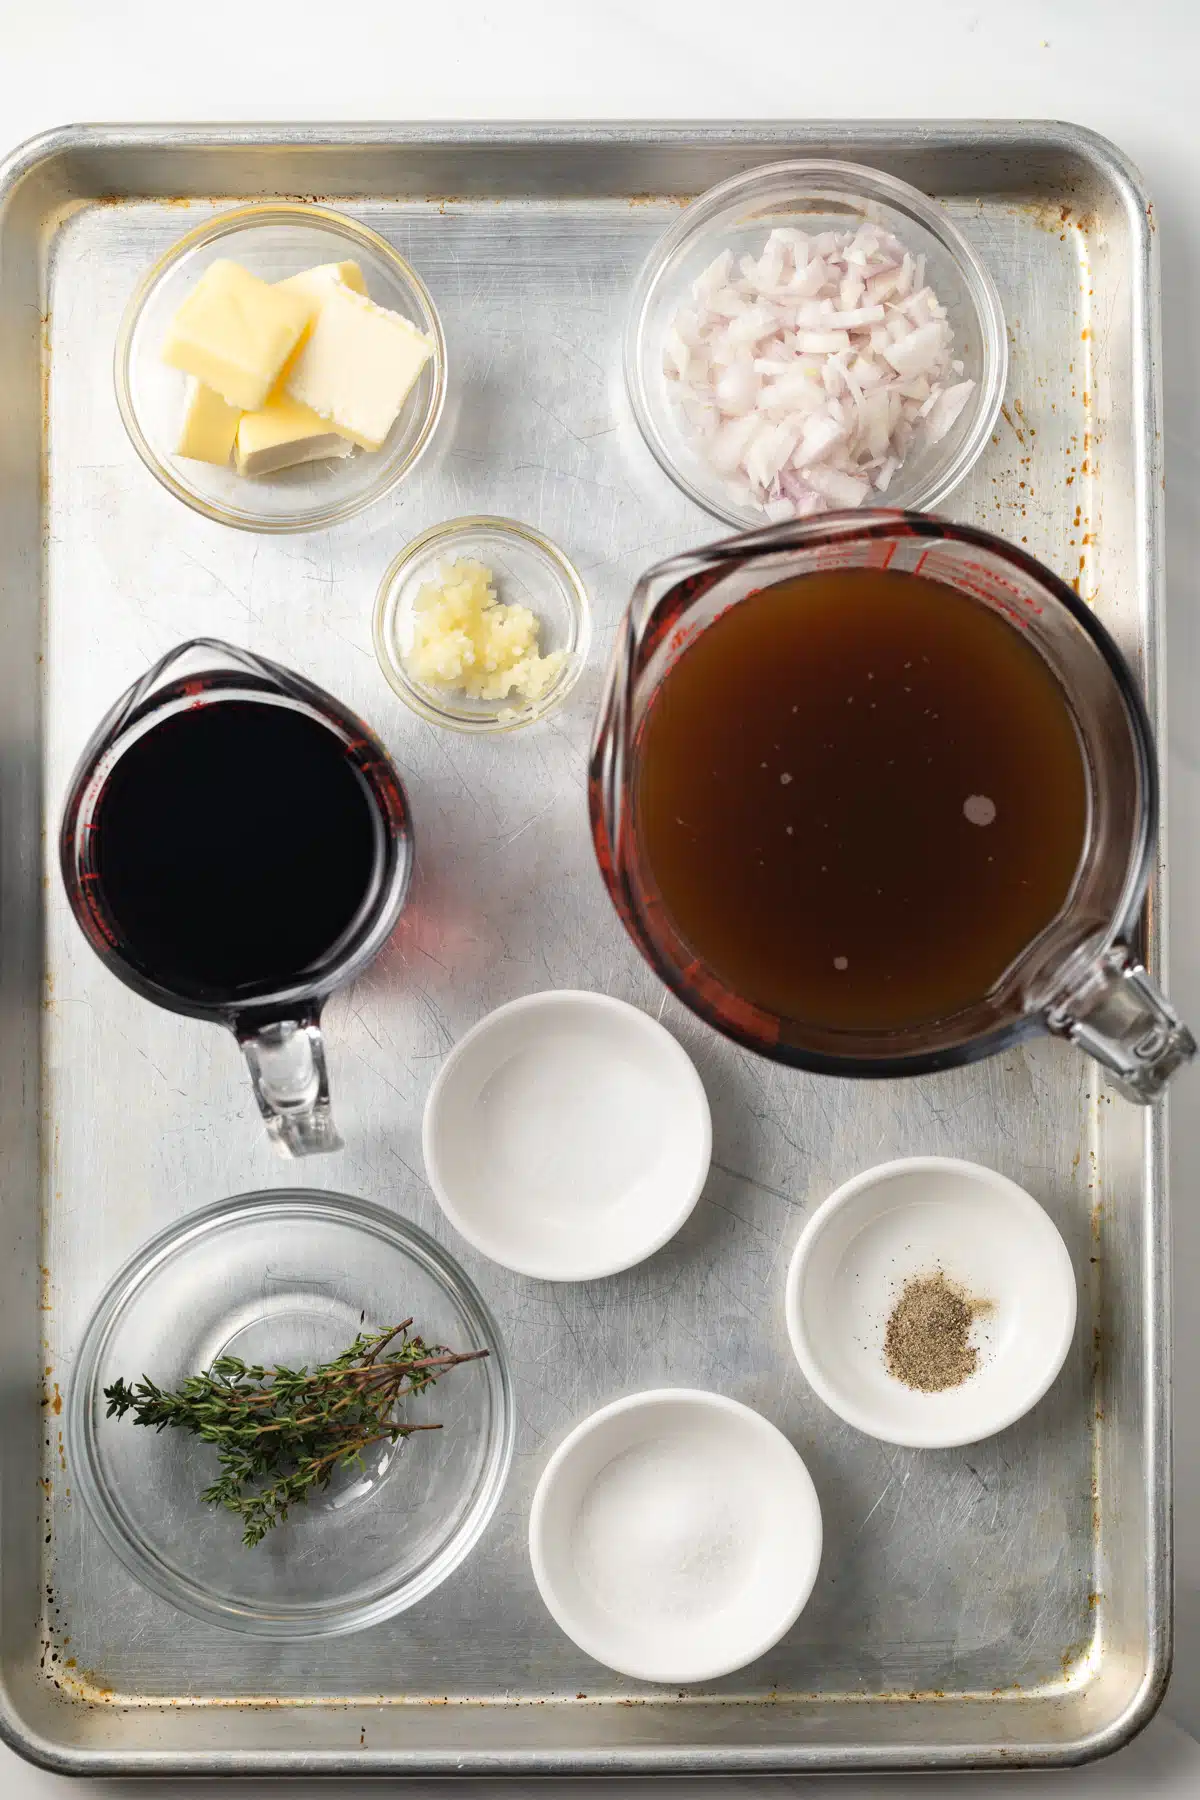 Ingredients for red wine sauce.